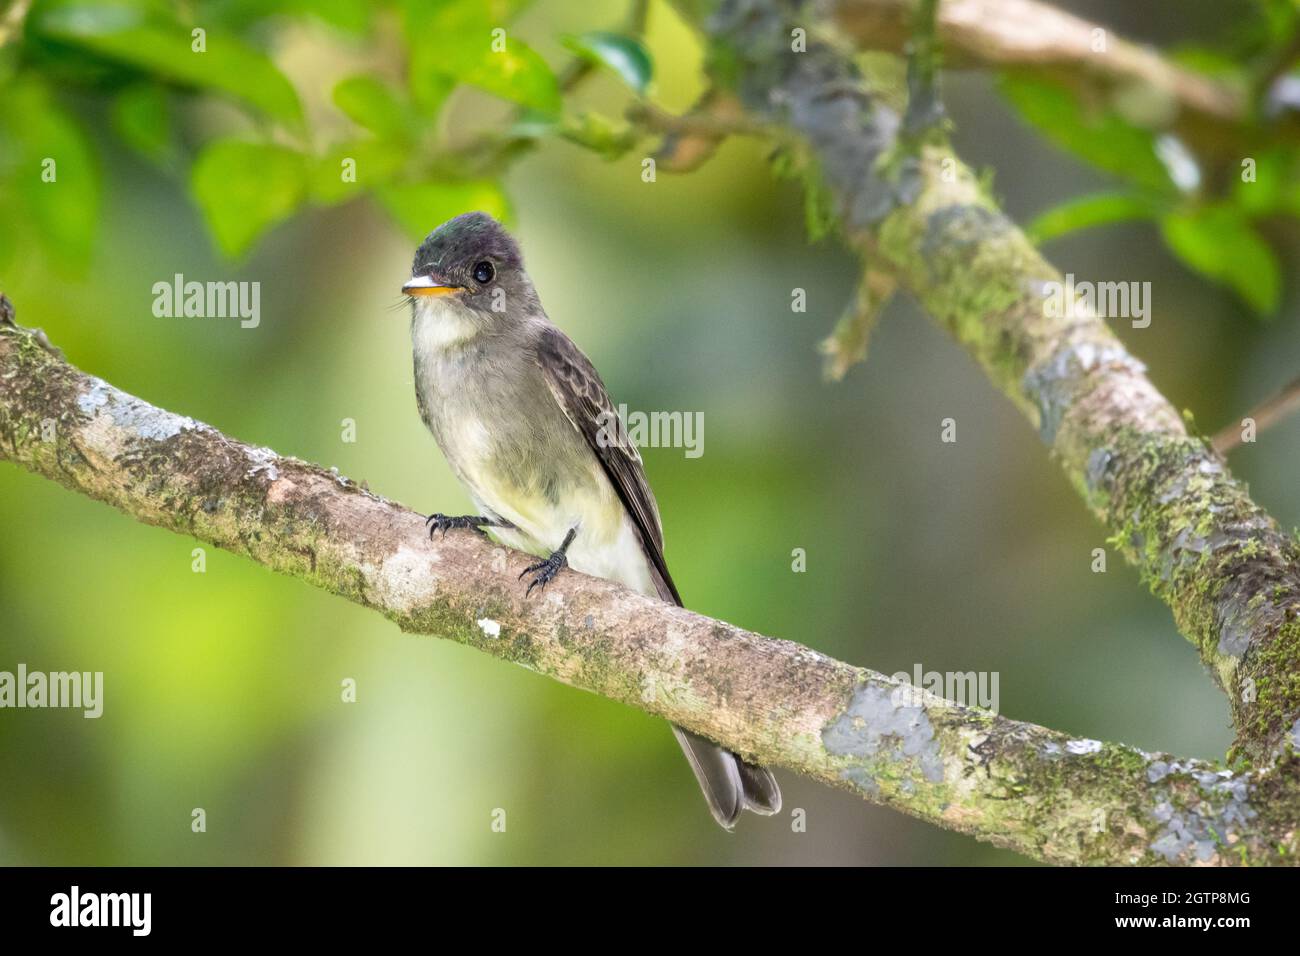 A vibrant photo of a Yellow-bellied Elaenia (Elaenia flavogaster) perching in a tree with a soft blurred background. Stock Photo